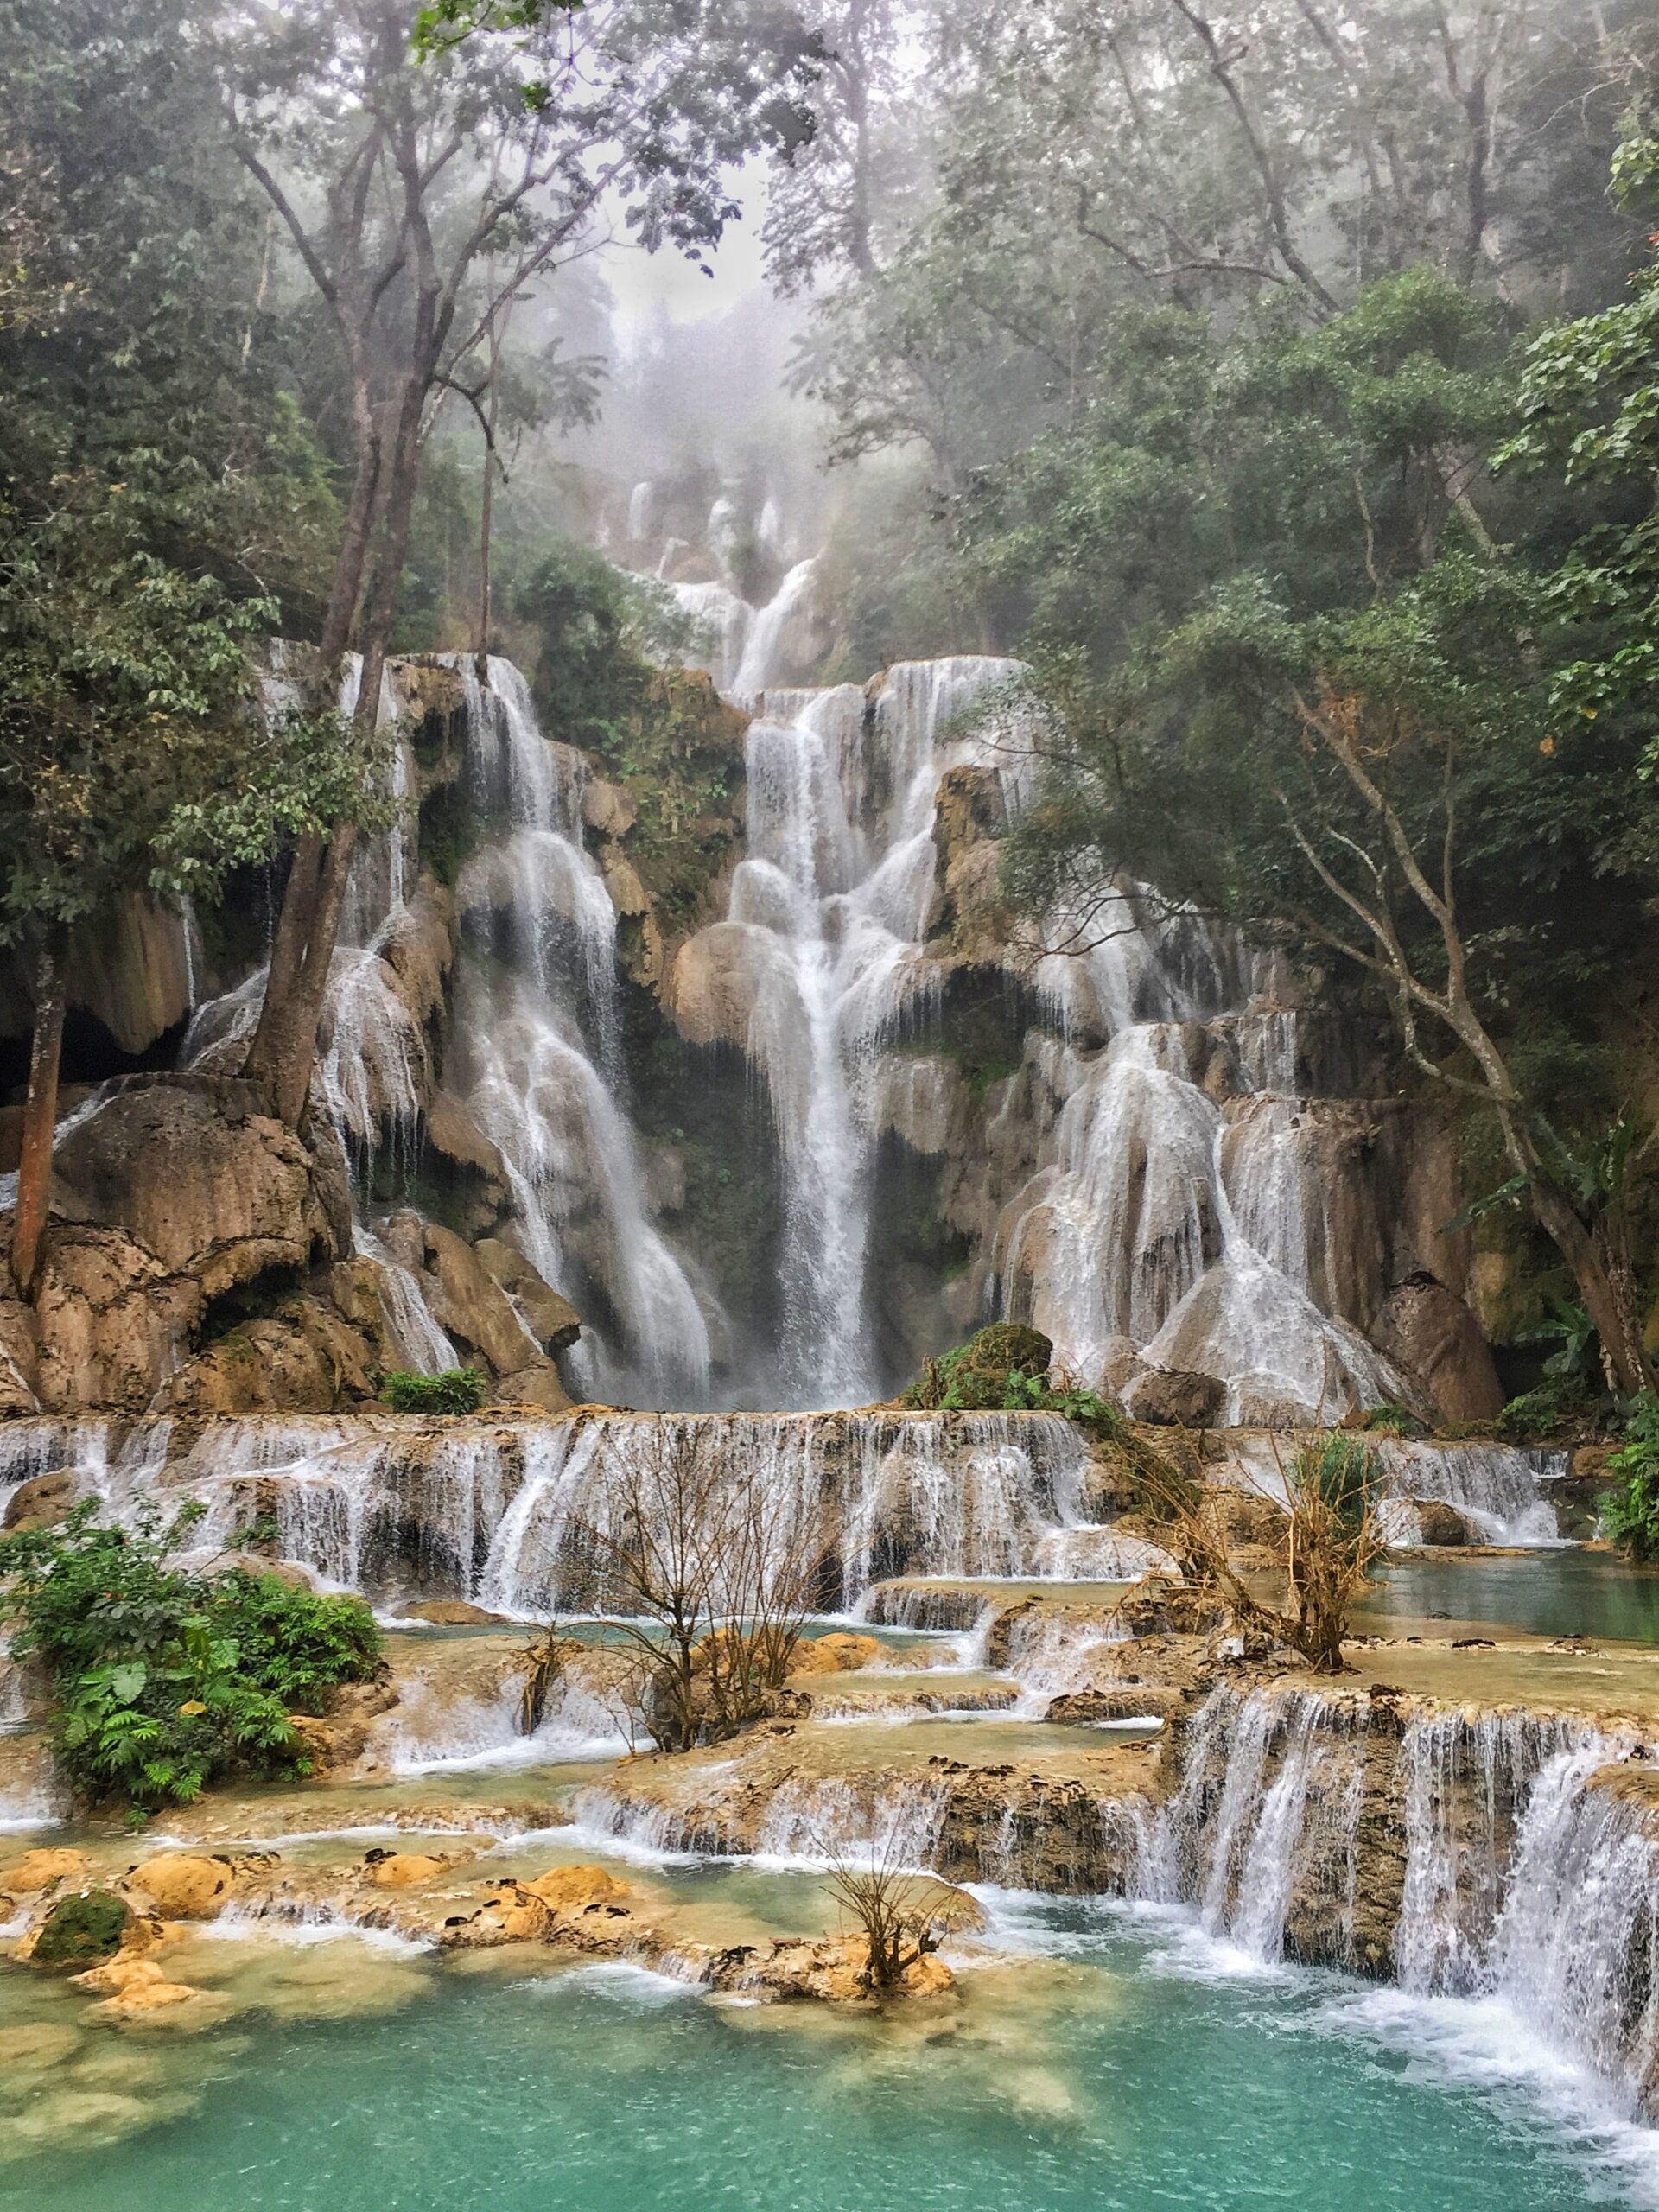 A breathtaking view of majestic Kuang Si waterfalls cascading down lush green mountains in Laos